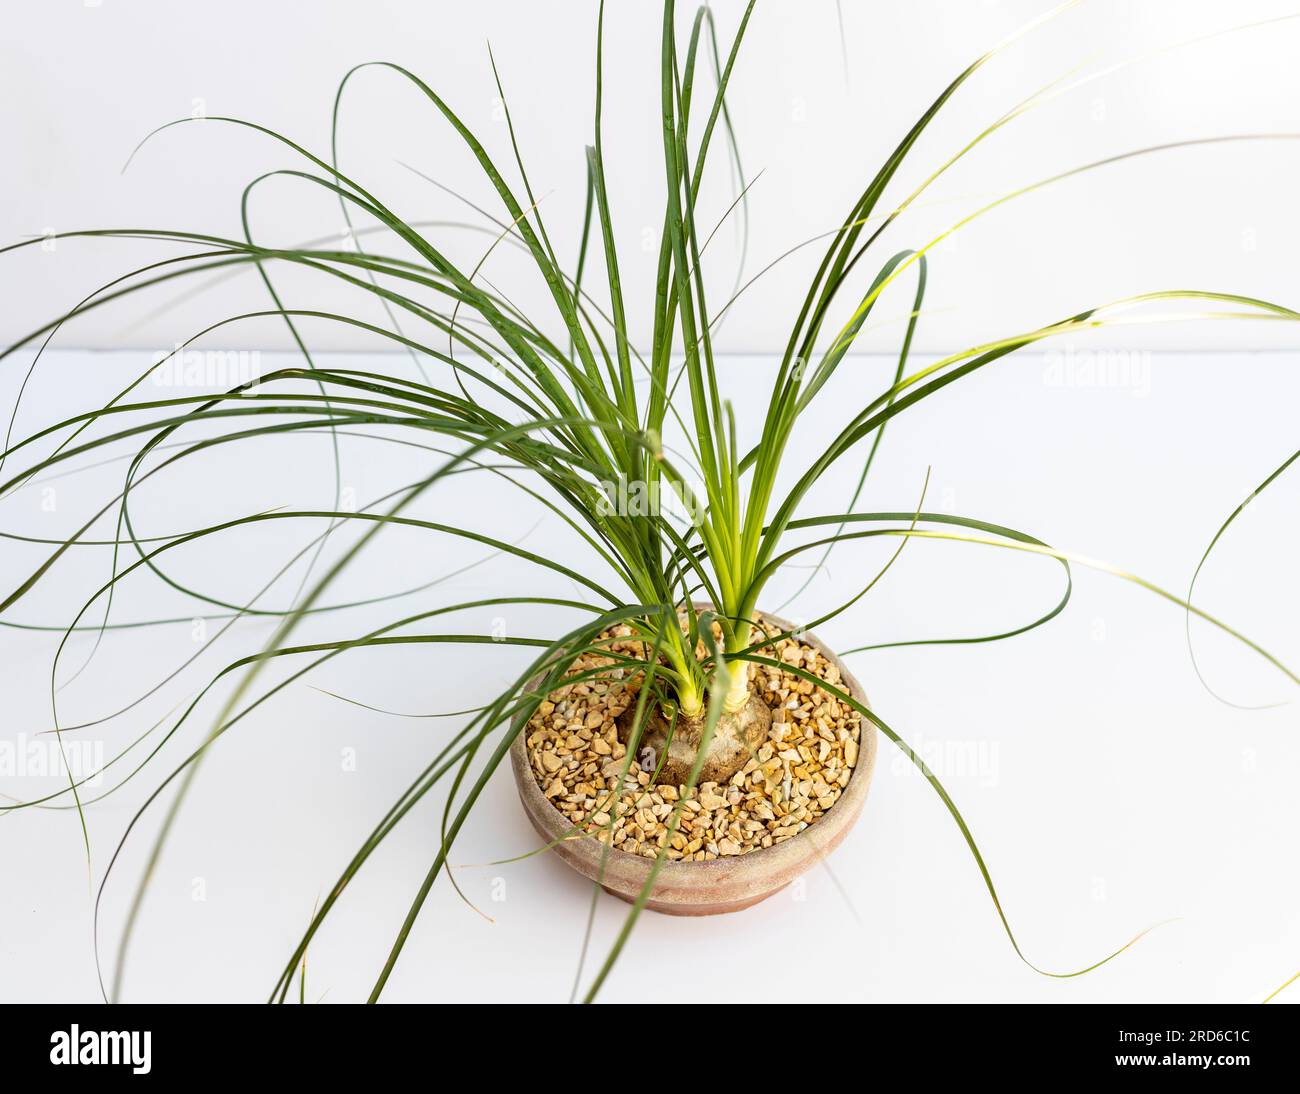 Dwarf ponytail palm top view on white isolated background Stock Photo